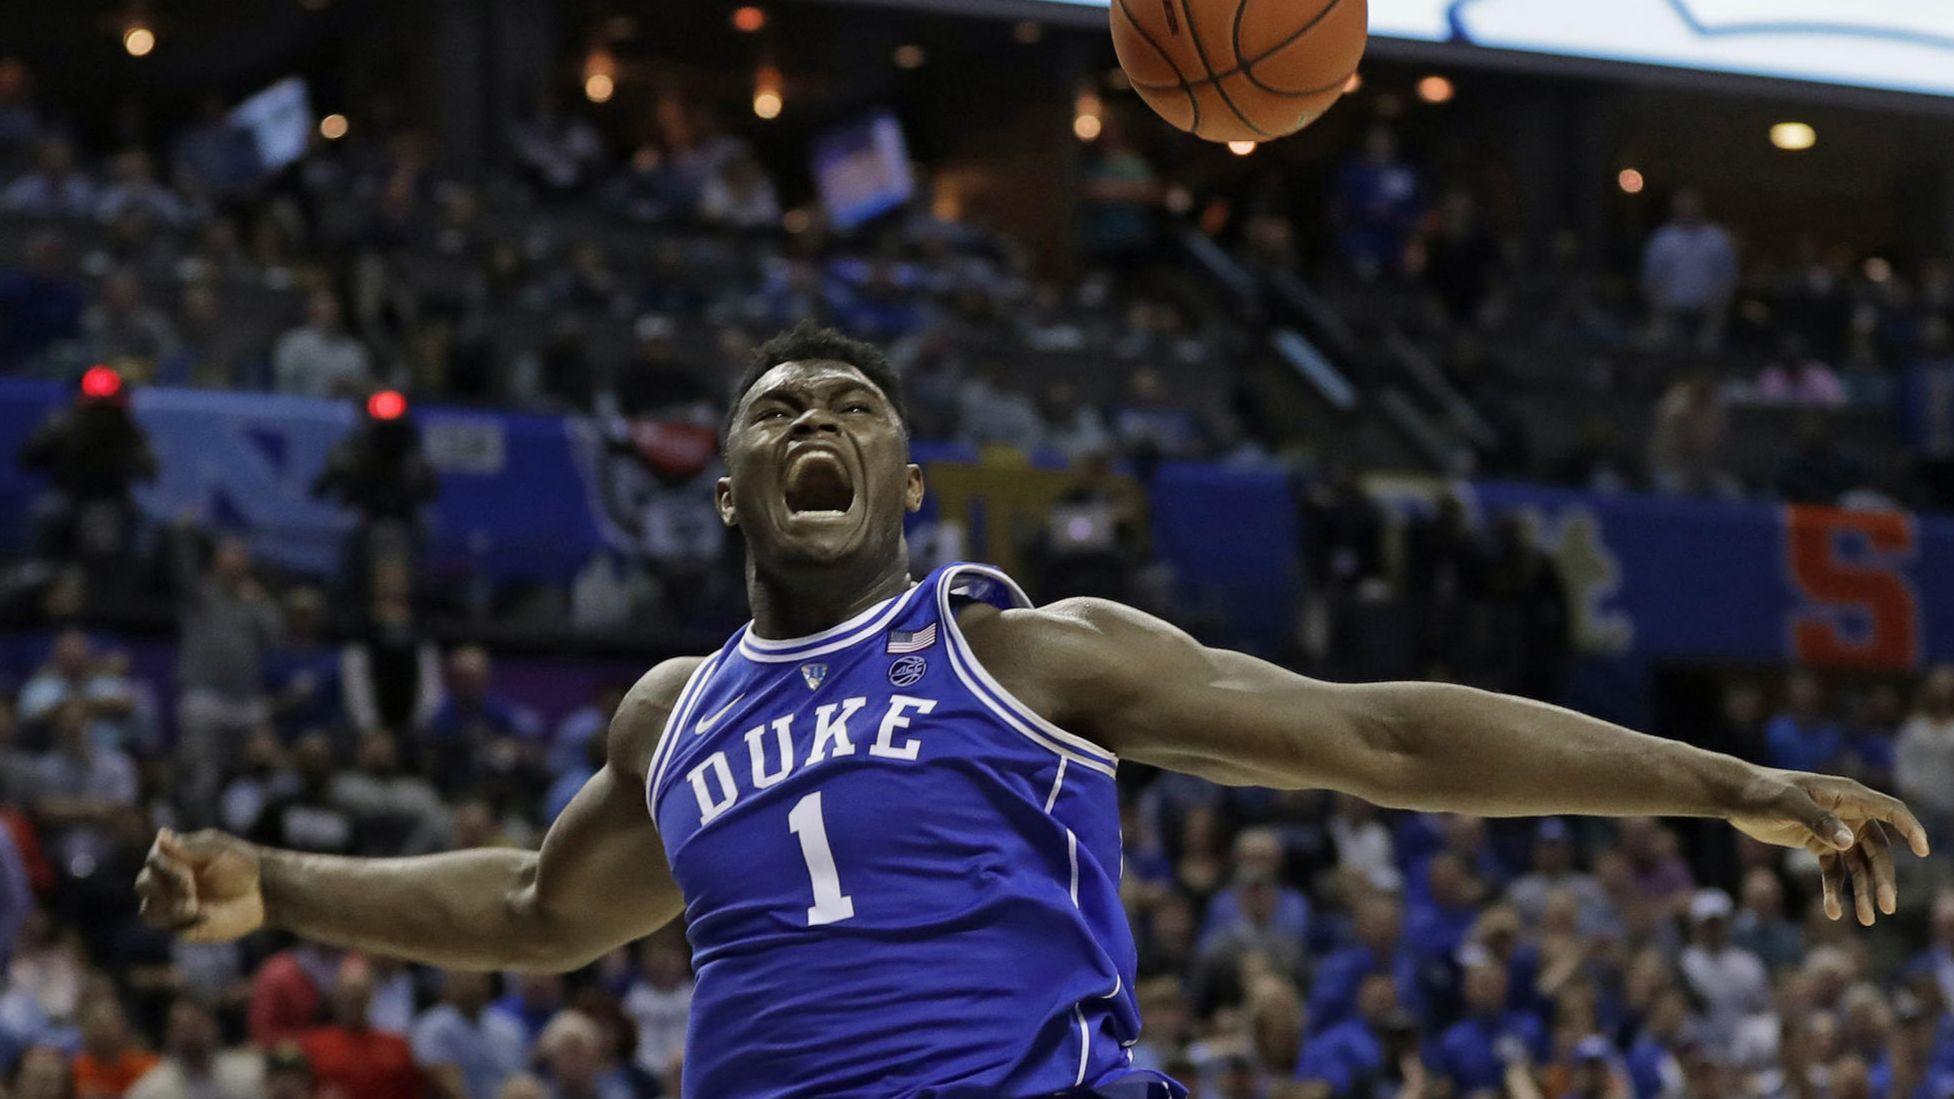 Zion Williamson declares for the NBA draft after 1 year at Duke - Chicago Tribune